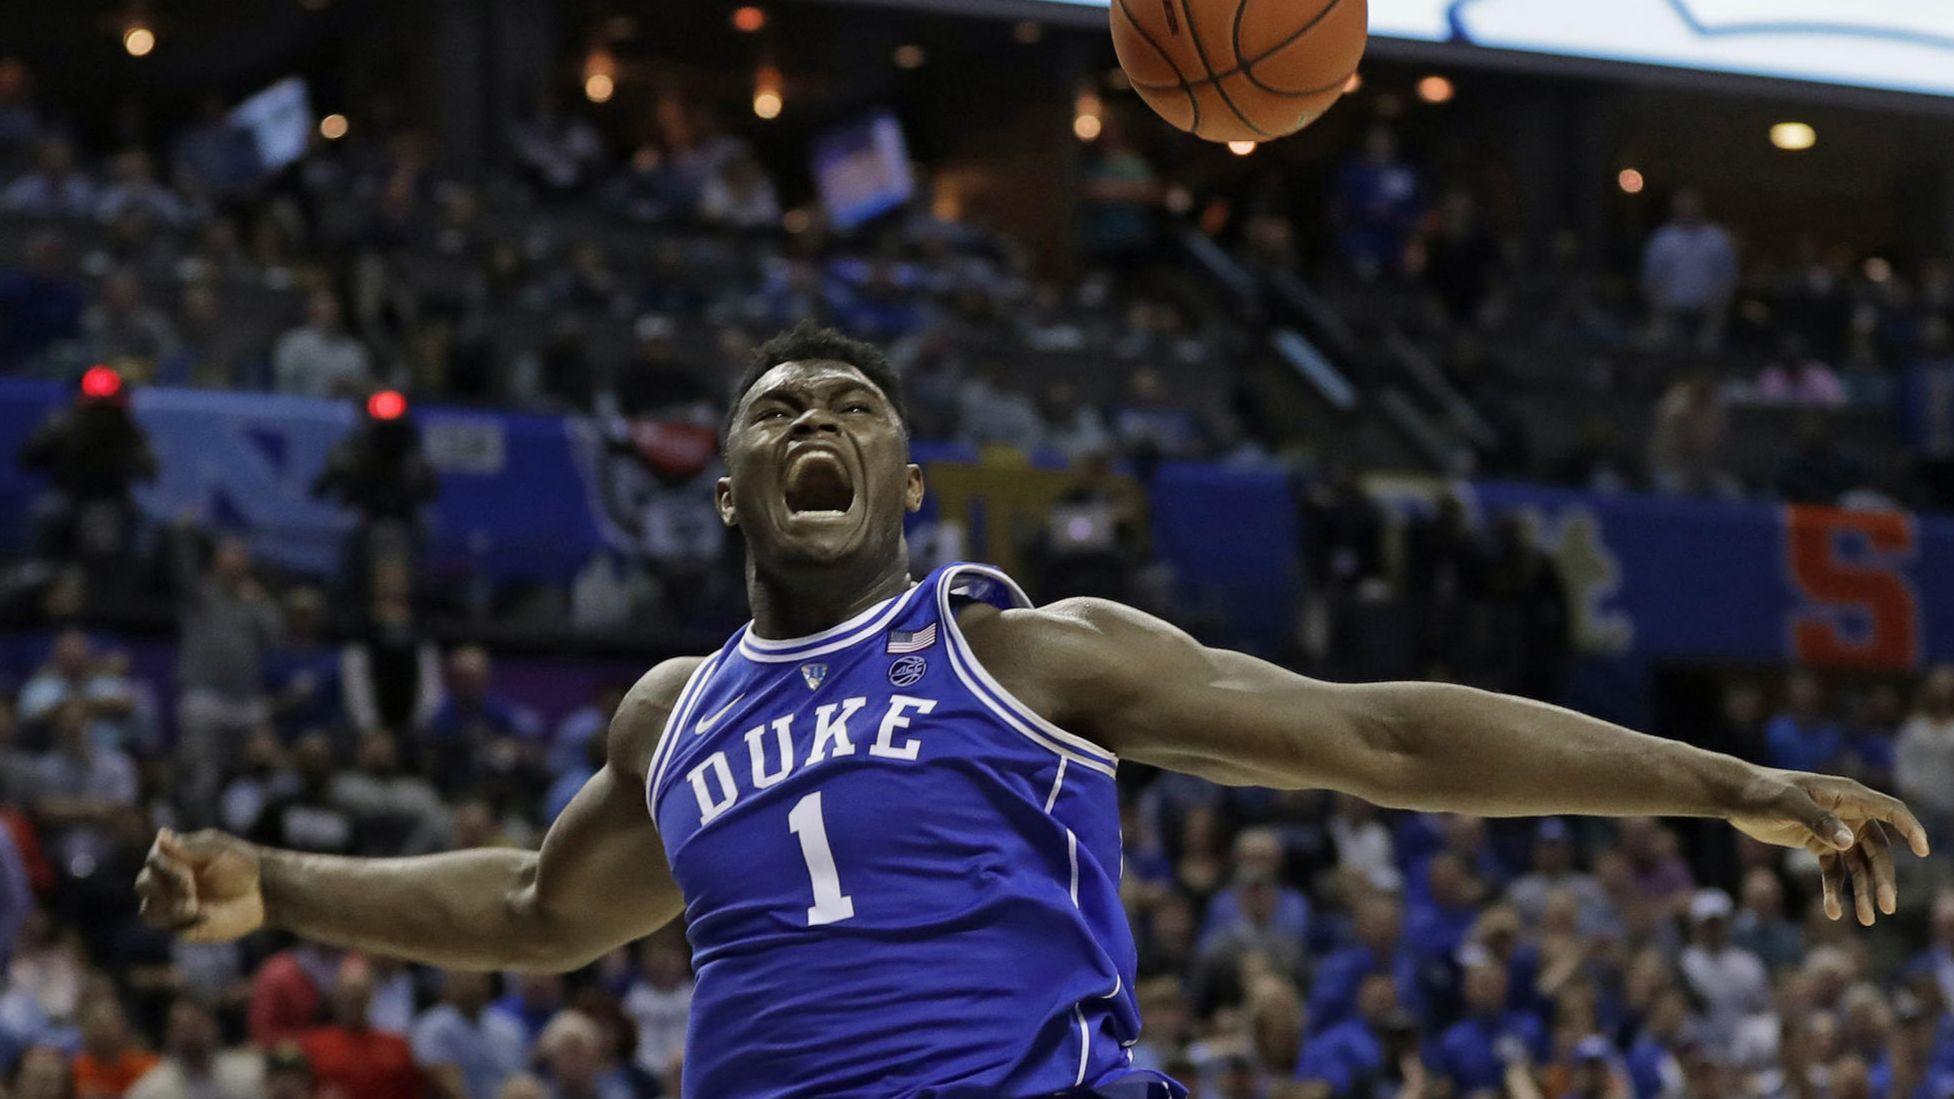 Zion Williamson declares for the NBA draft after 1 year at Duke - Chicago Tribune